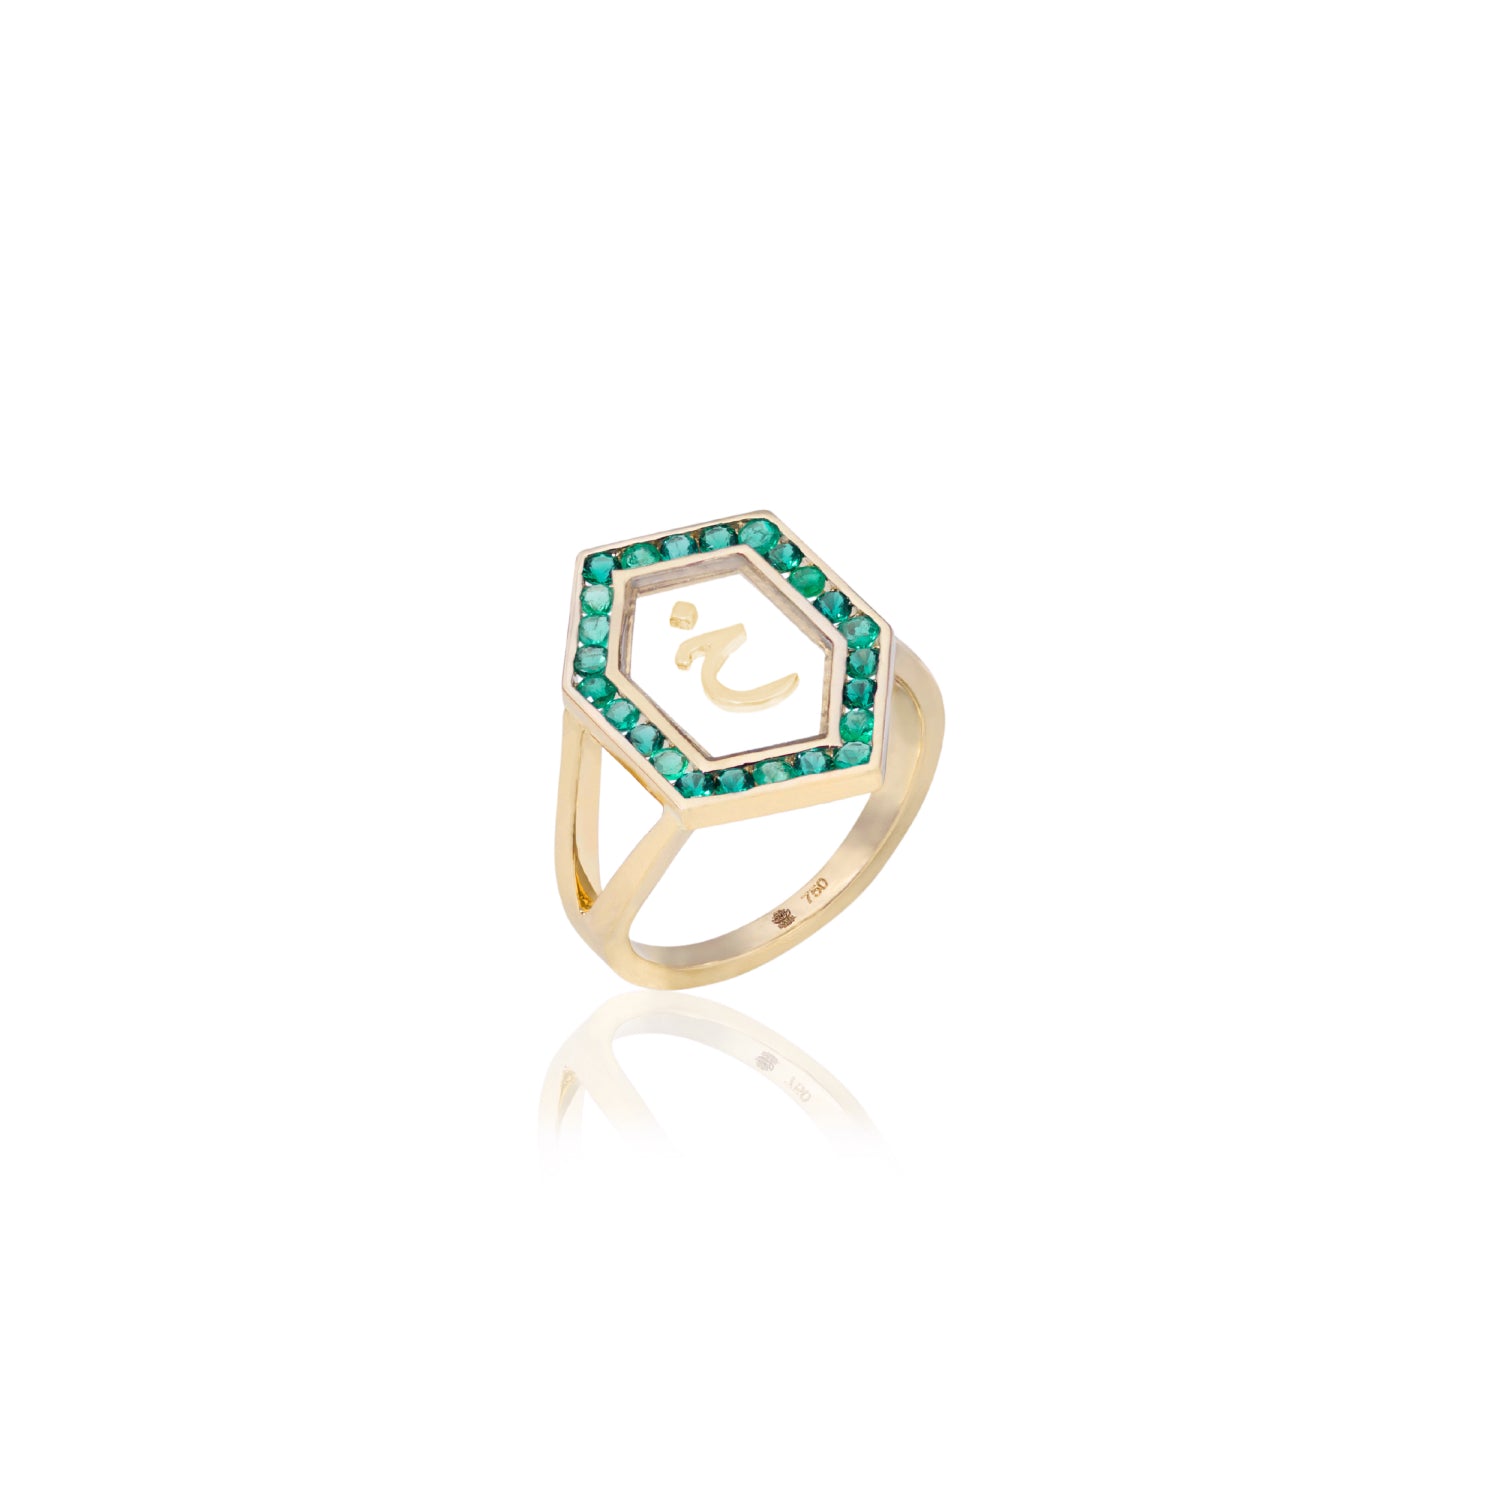 Qamoos 1.0 Letter خ Emerald Ring in Yellow Gold